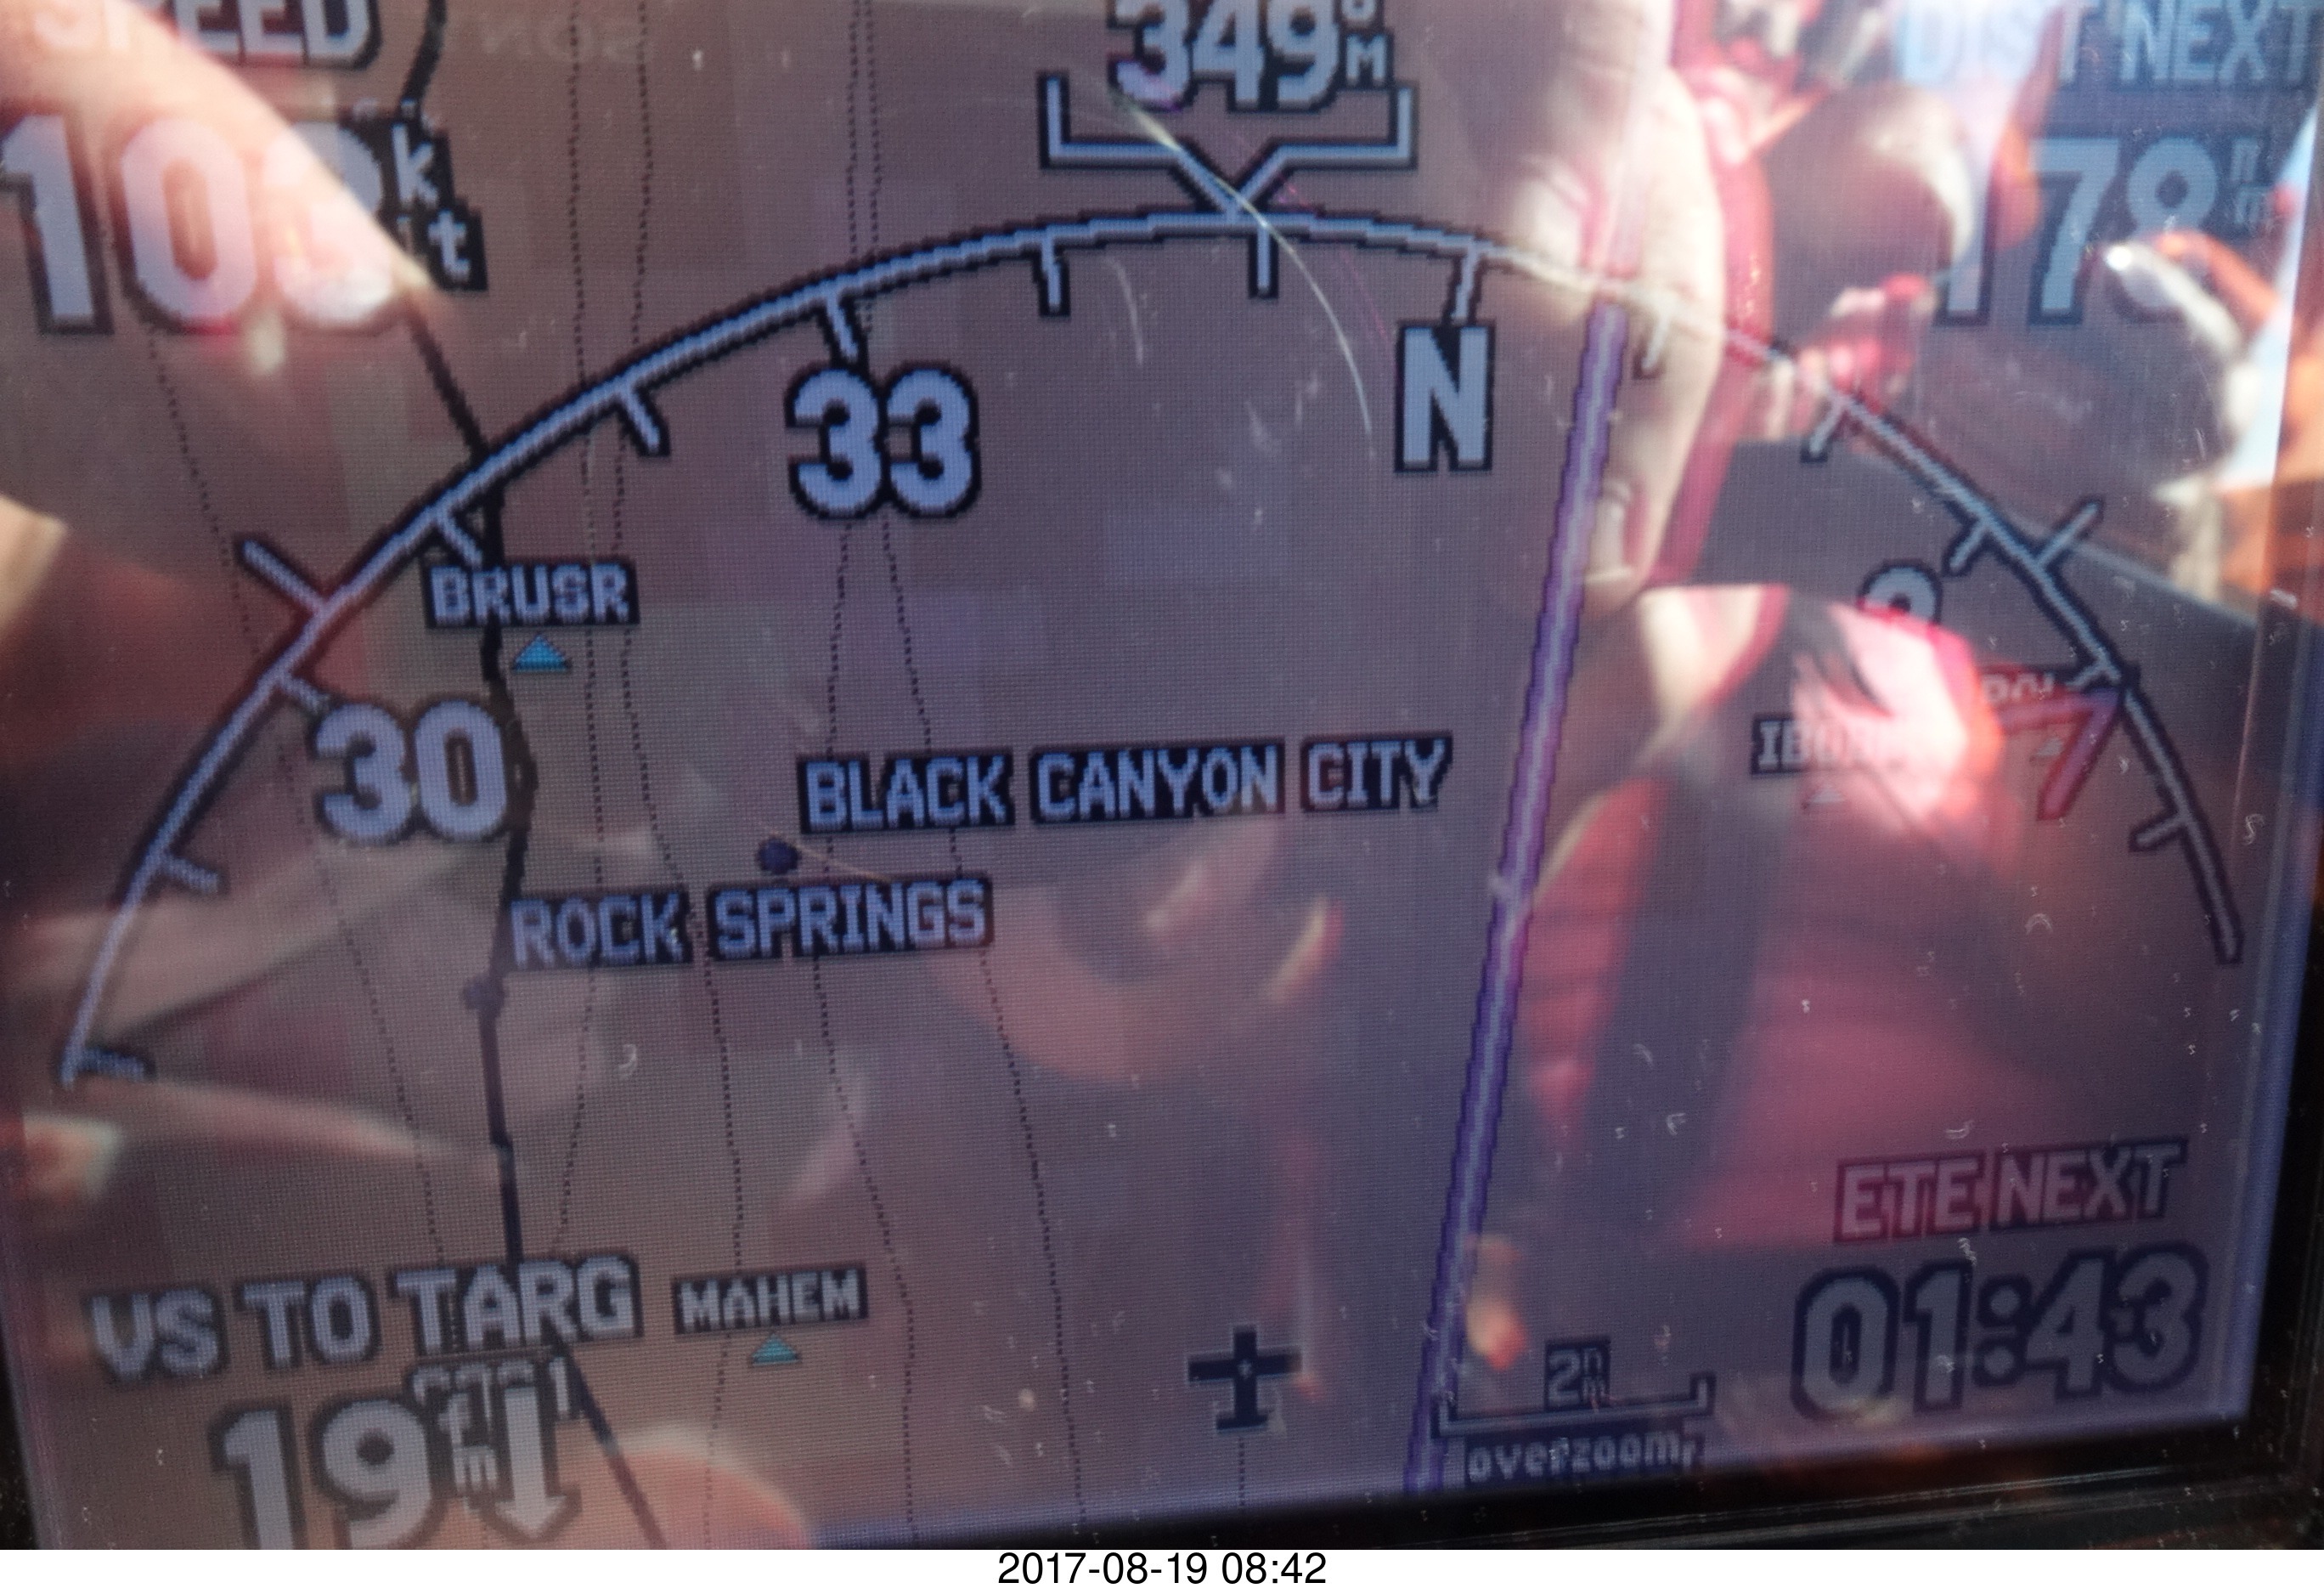 so there's a Rock Springs here in Arizona on my GPS